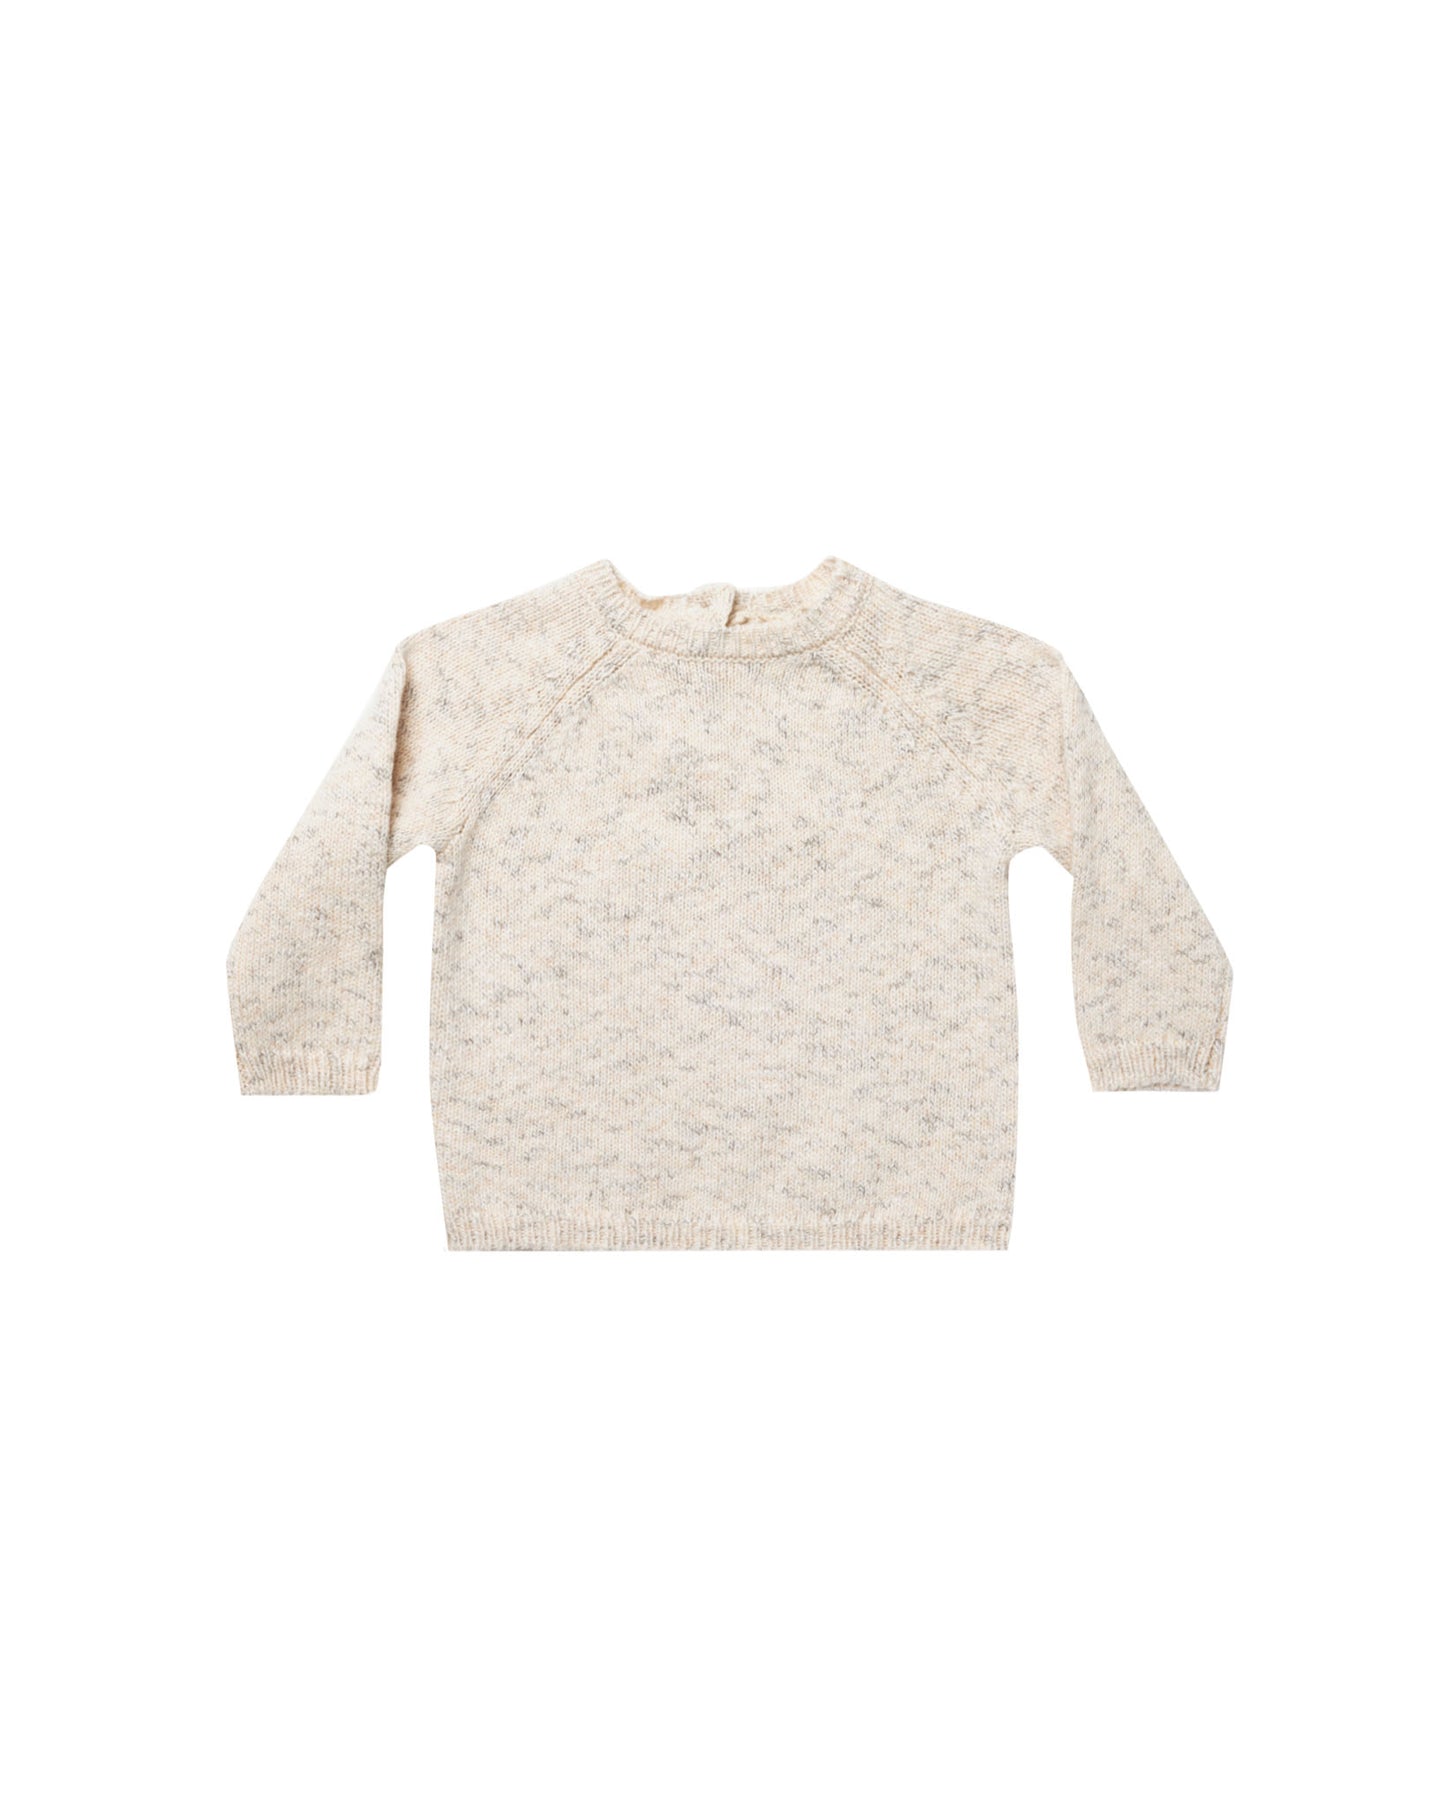 Quincy Mae - Speckled Knit Sweater - Natural